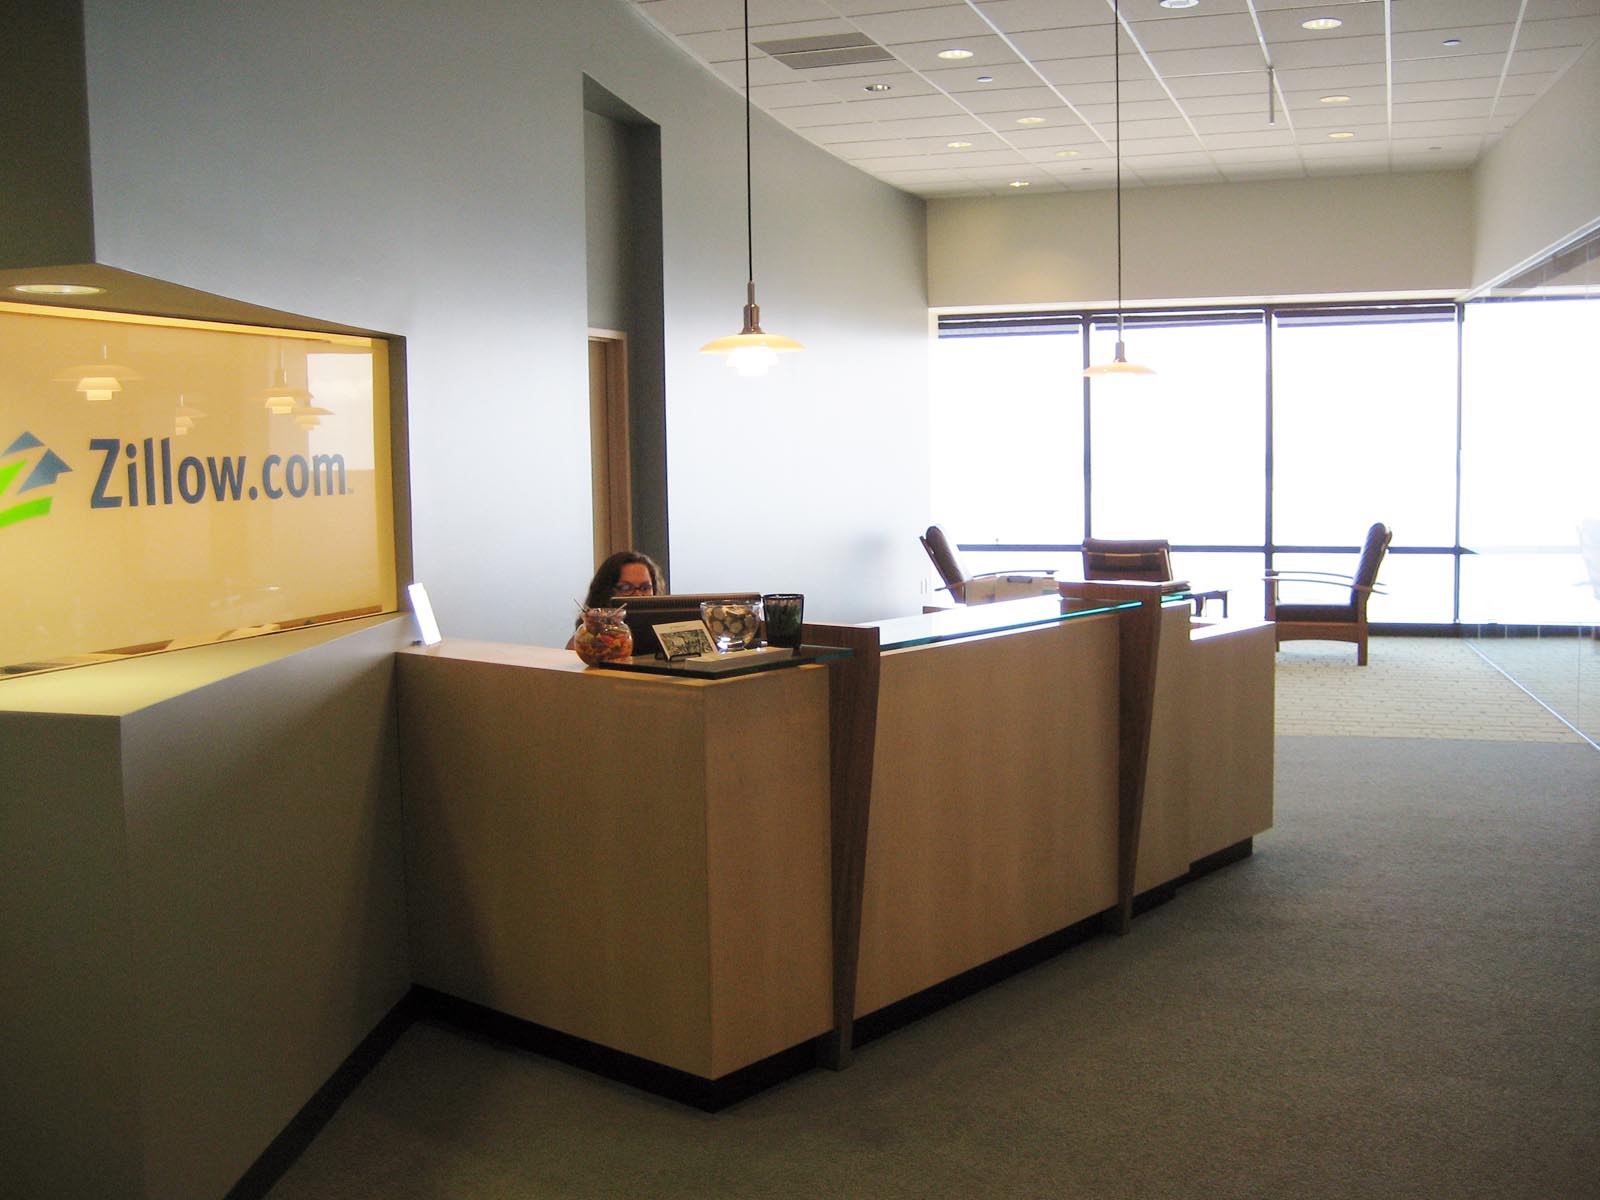 Zillow office interior and front desk